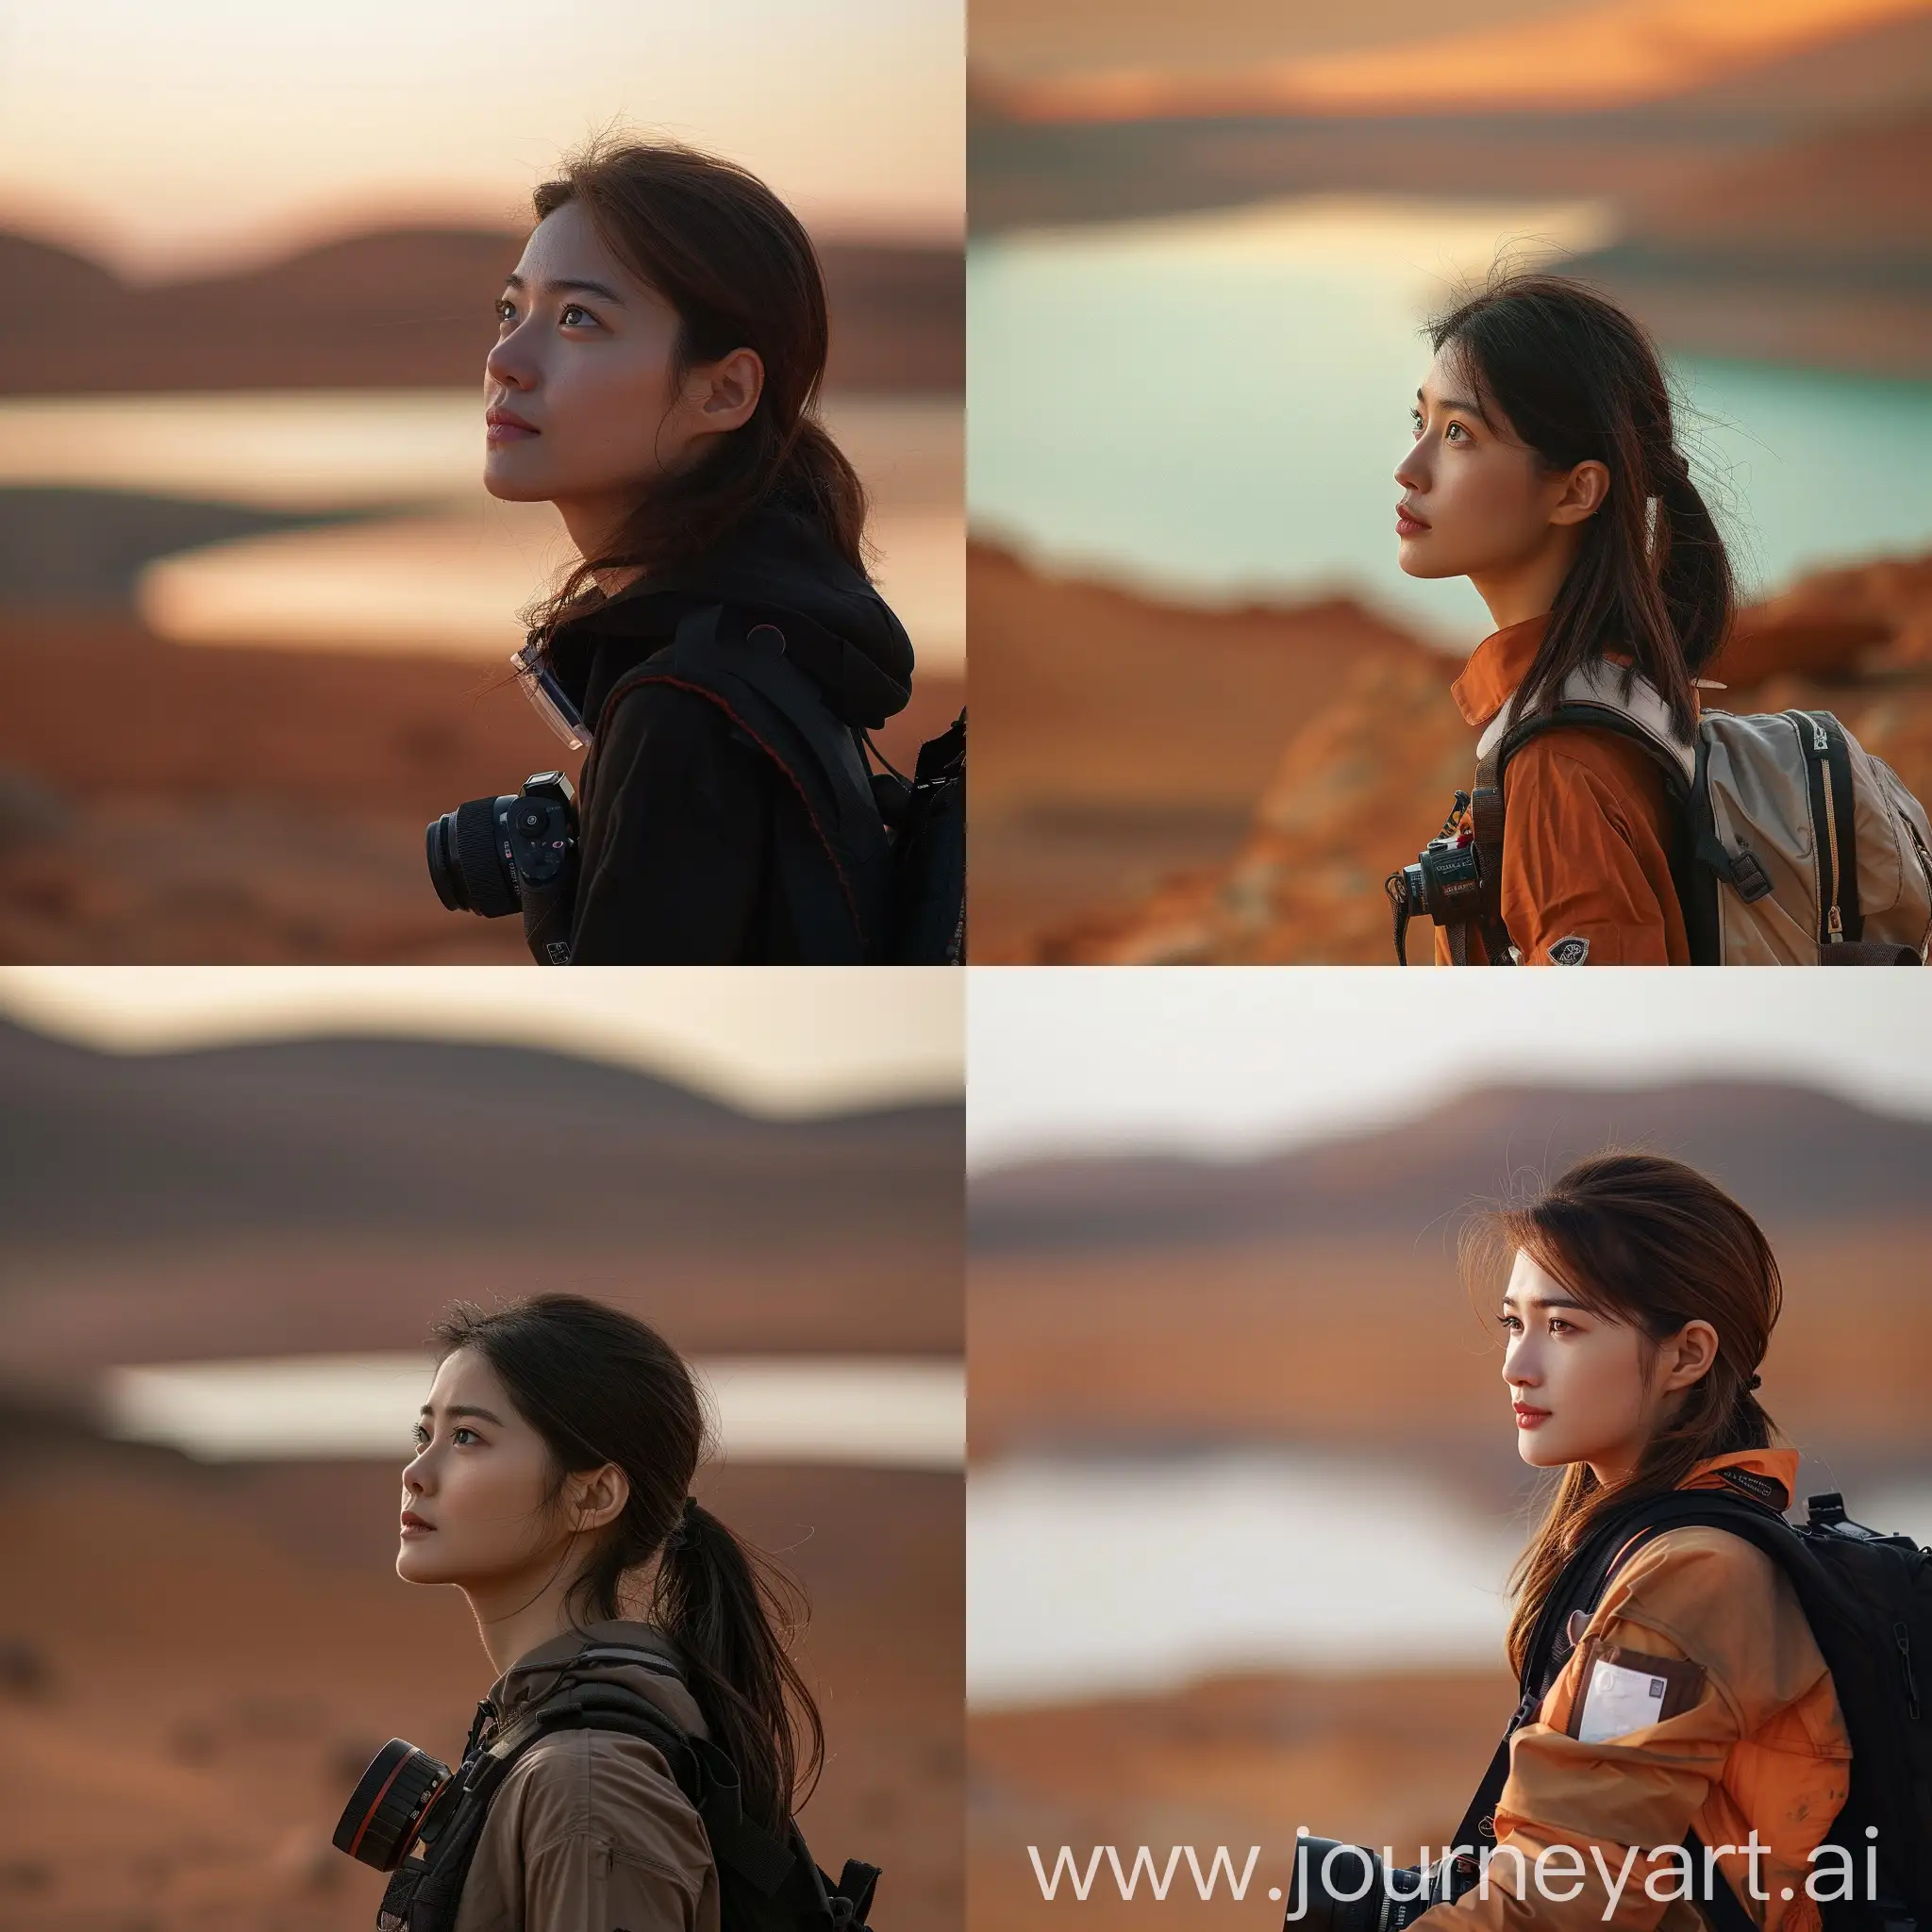 A medium-distance profile photo of a Thai woman taken with a DSLR camera on Mars or beside it, with a lake in the background blurred.